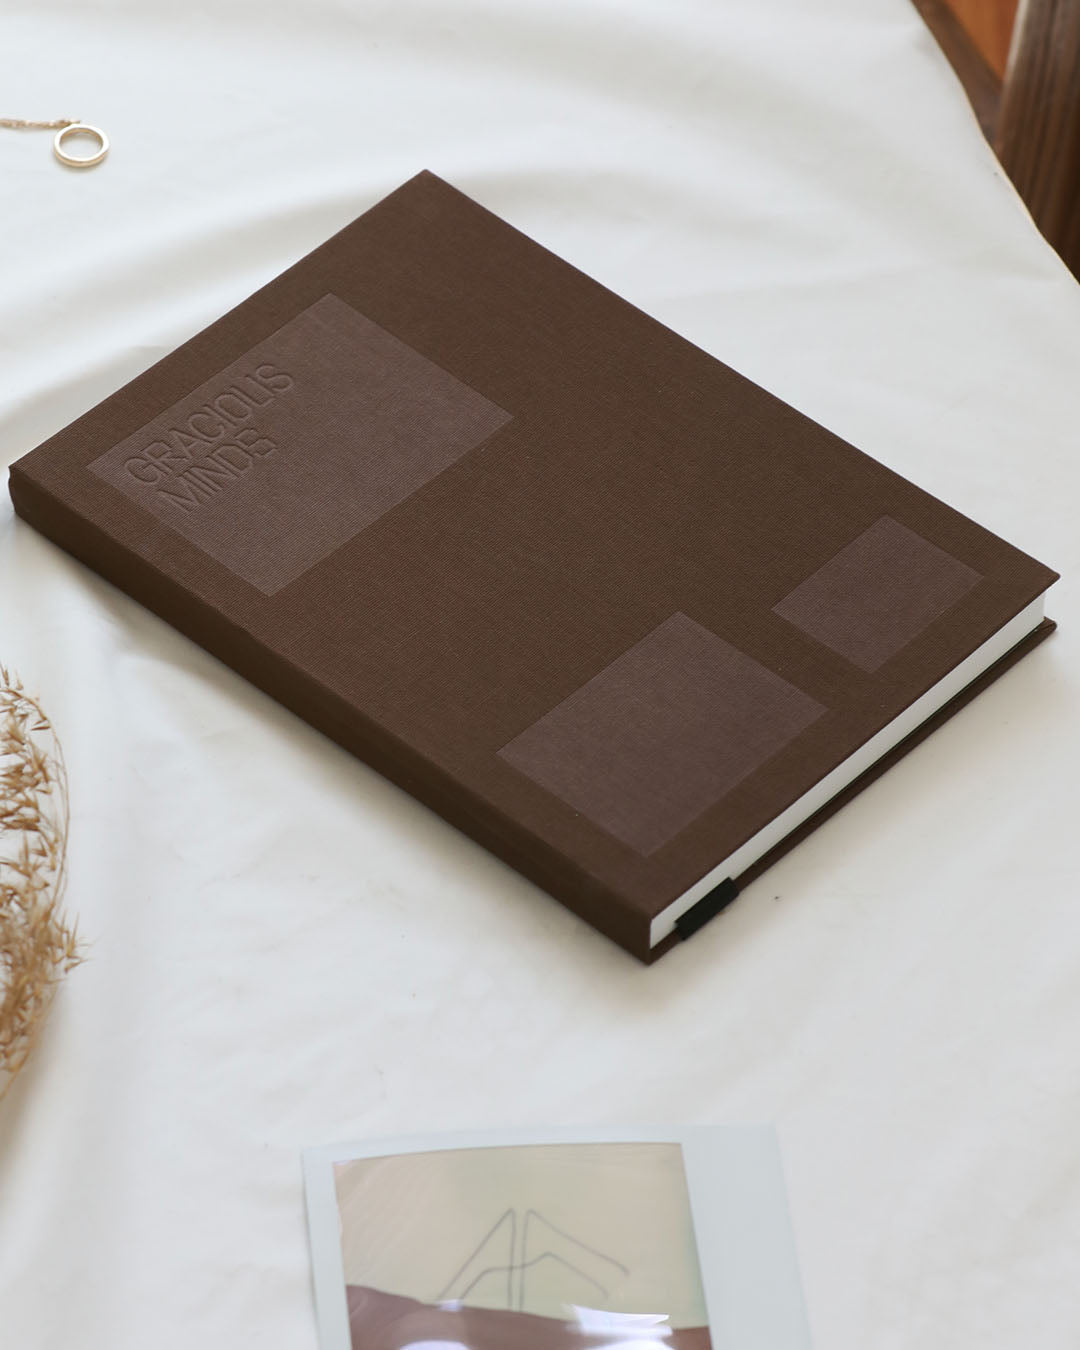 Reflections Linen & Stone Paper Journal - Burnt Amber Books by Gracious Minds - Prae Store